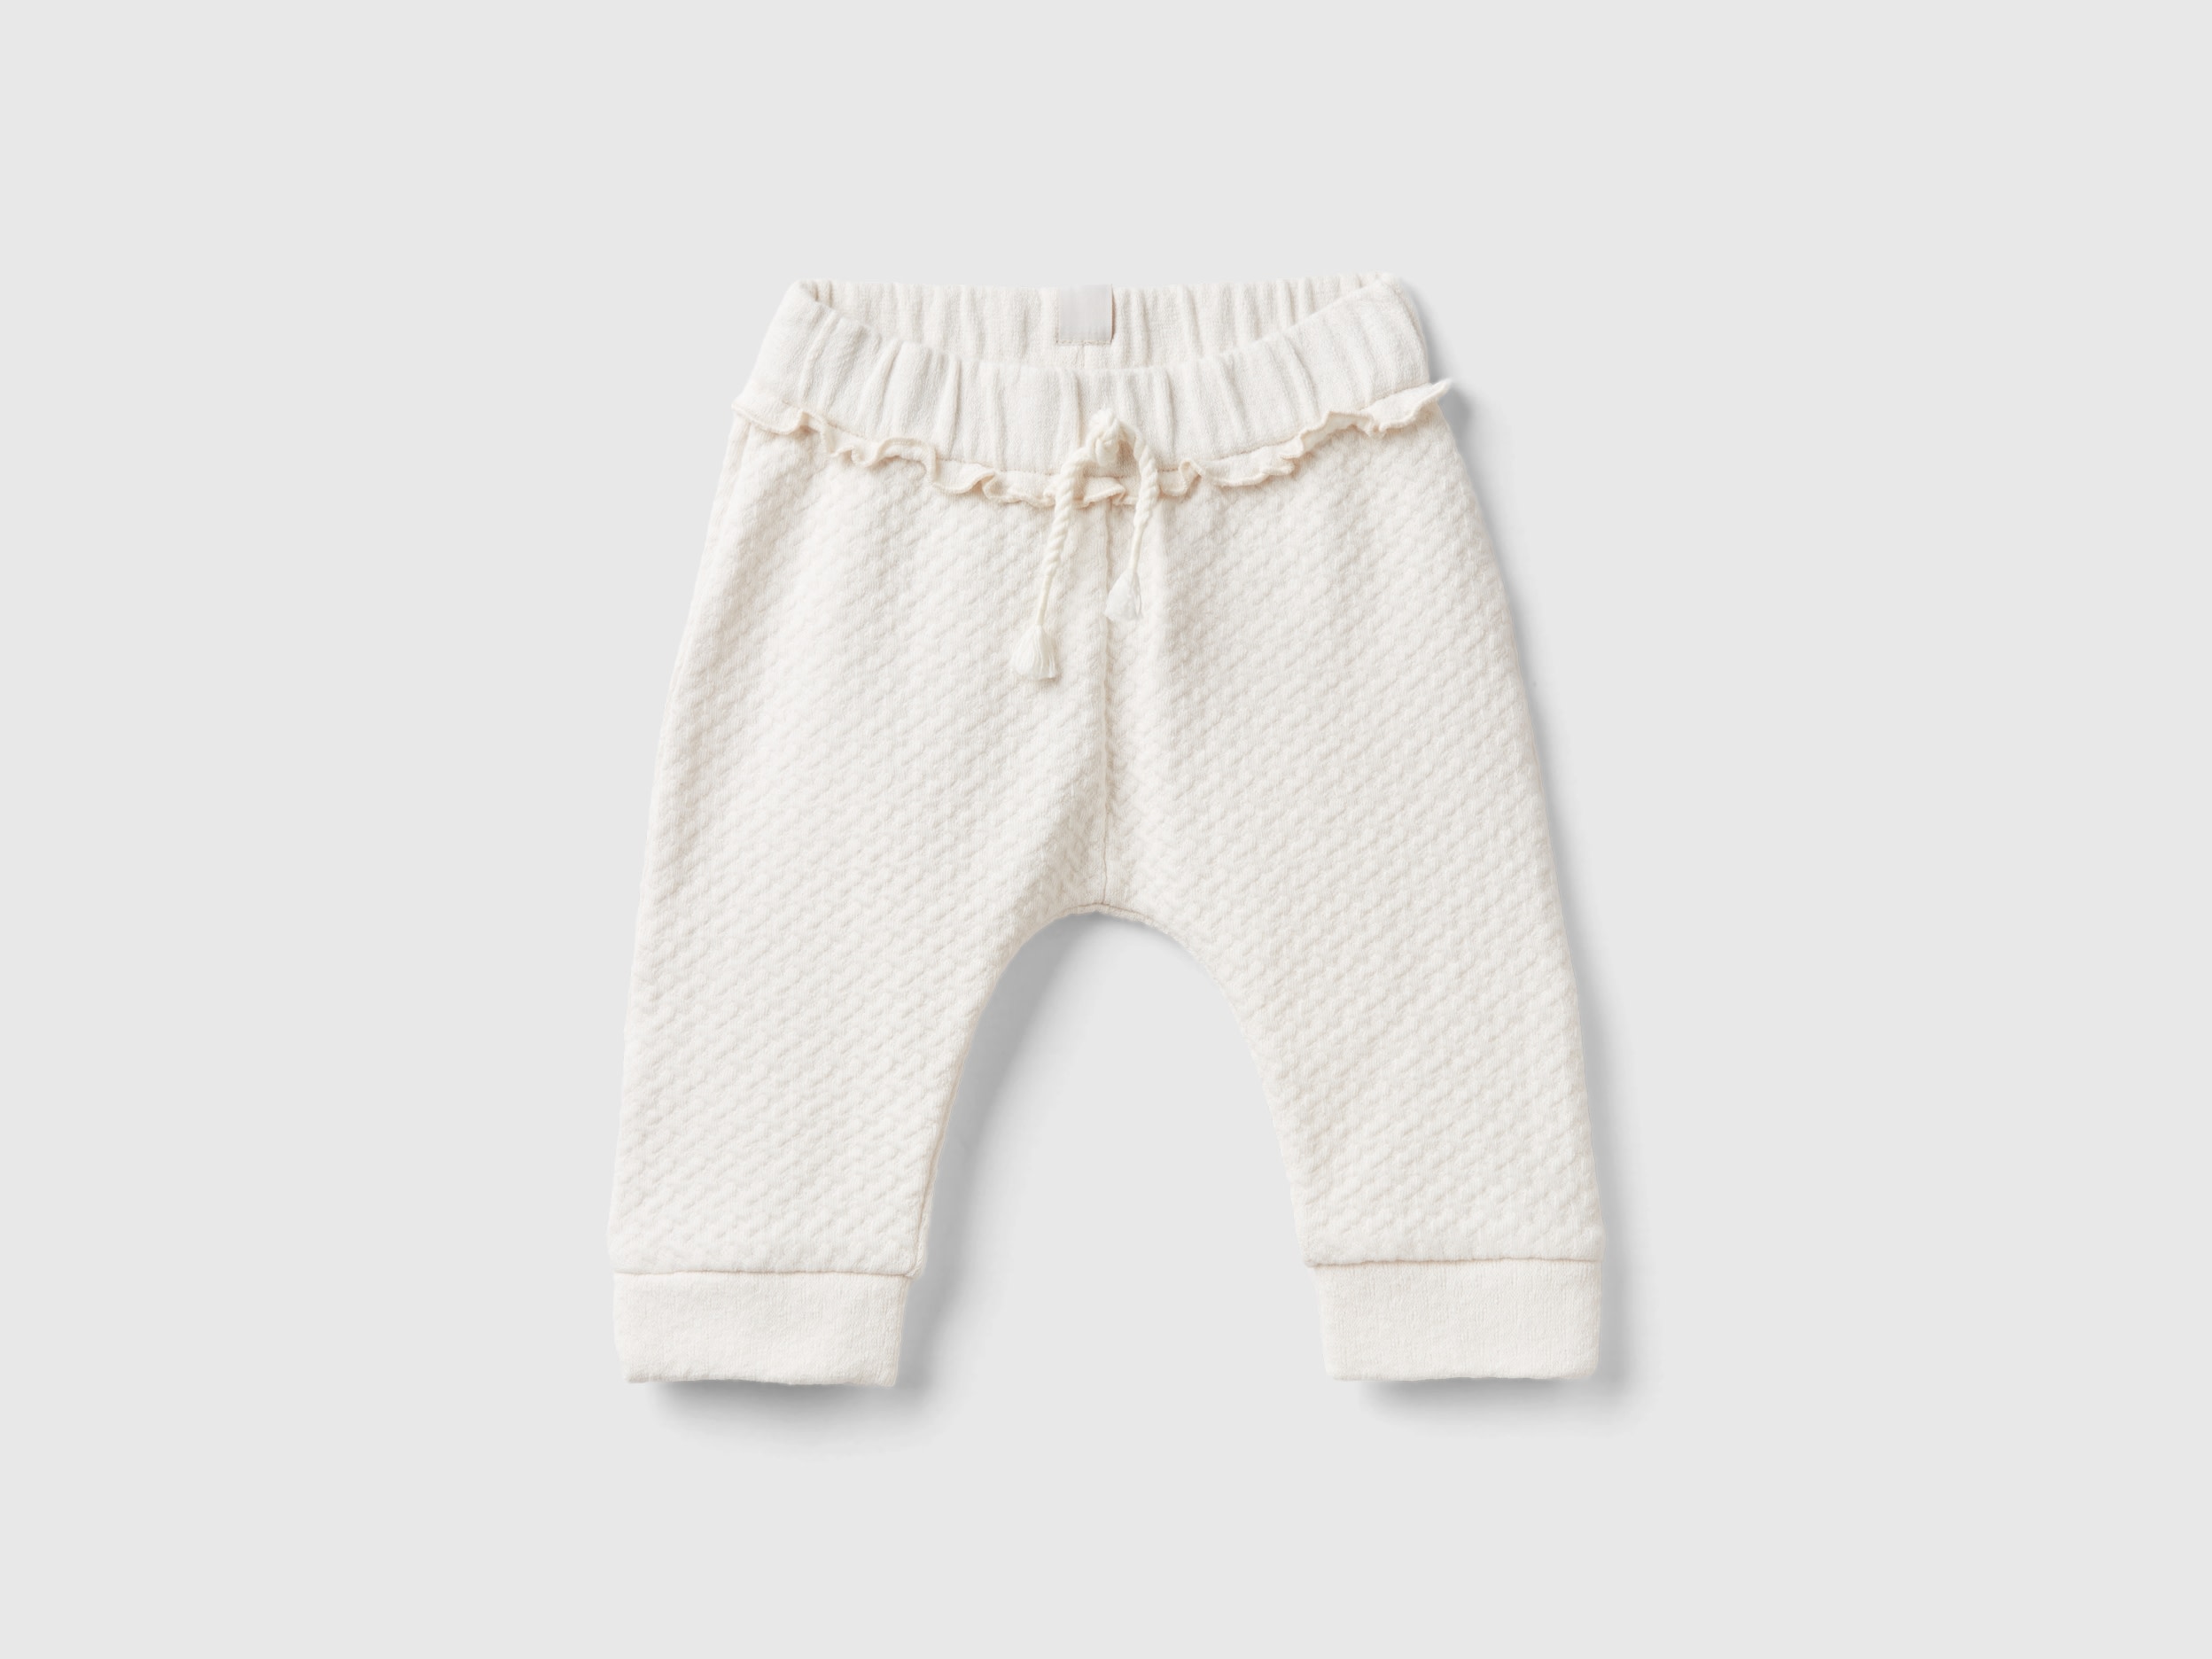 Image of Benetton, Jacquard Trousers With Slits, size 50, Creamy White, Kids